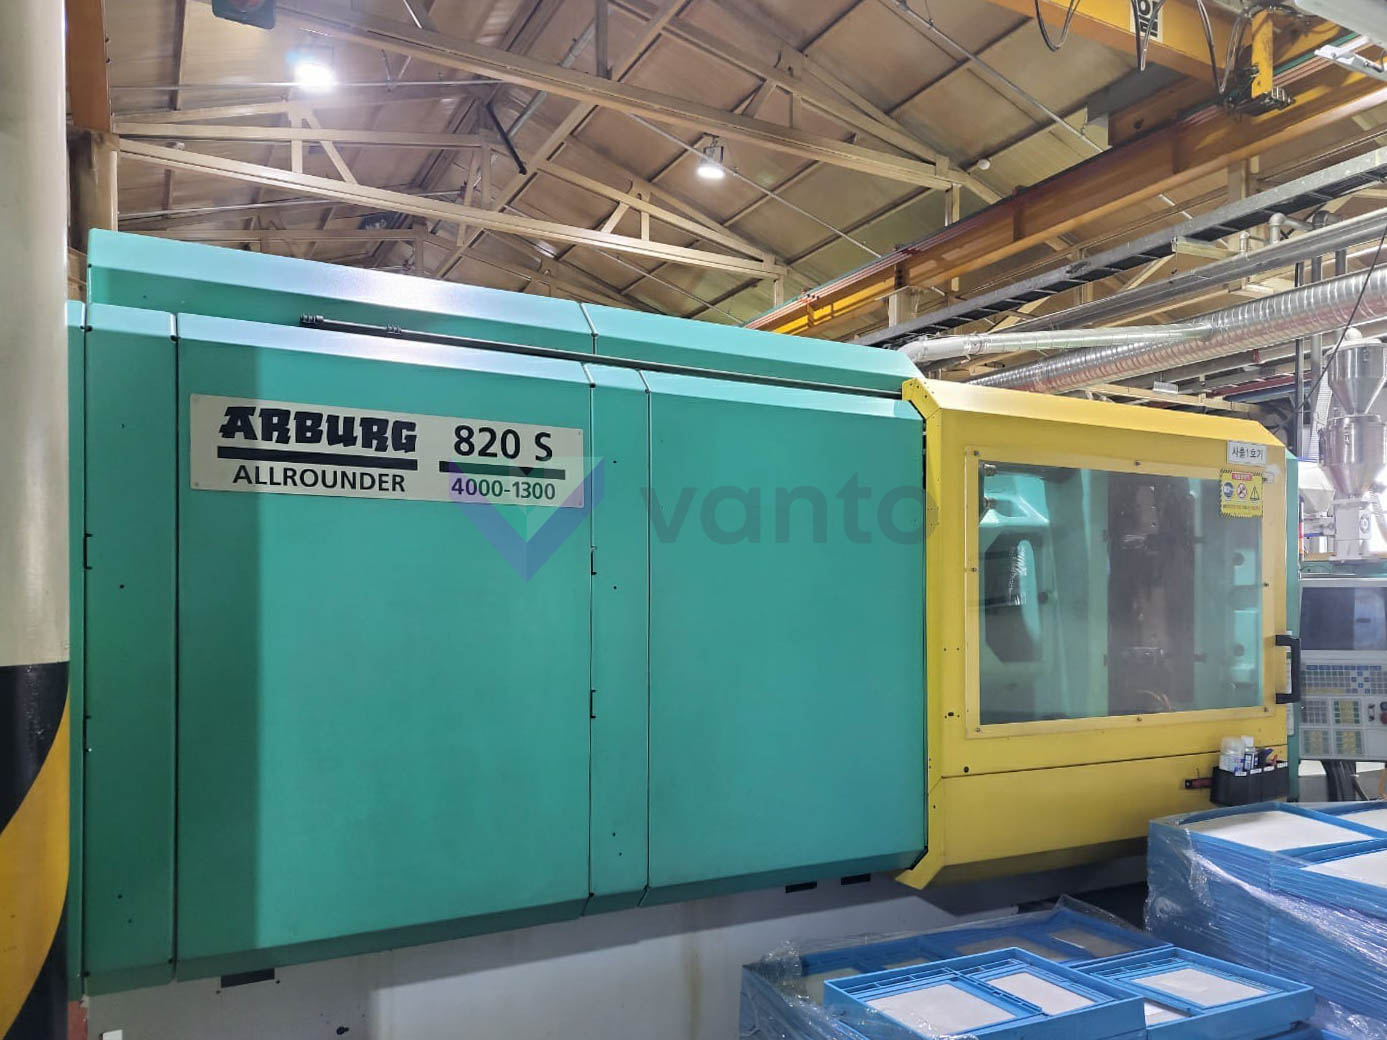 ARBURG 820 S ALLROUNDER 4000 - 1300 400t bimaterial injection molding machine (2004) id10825